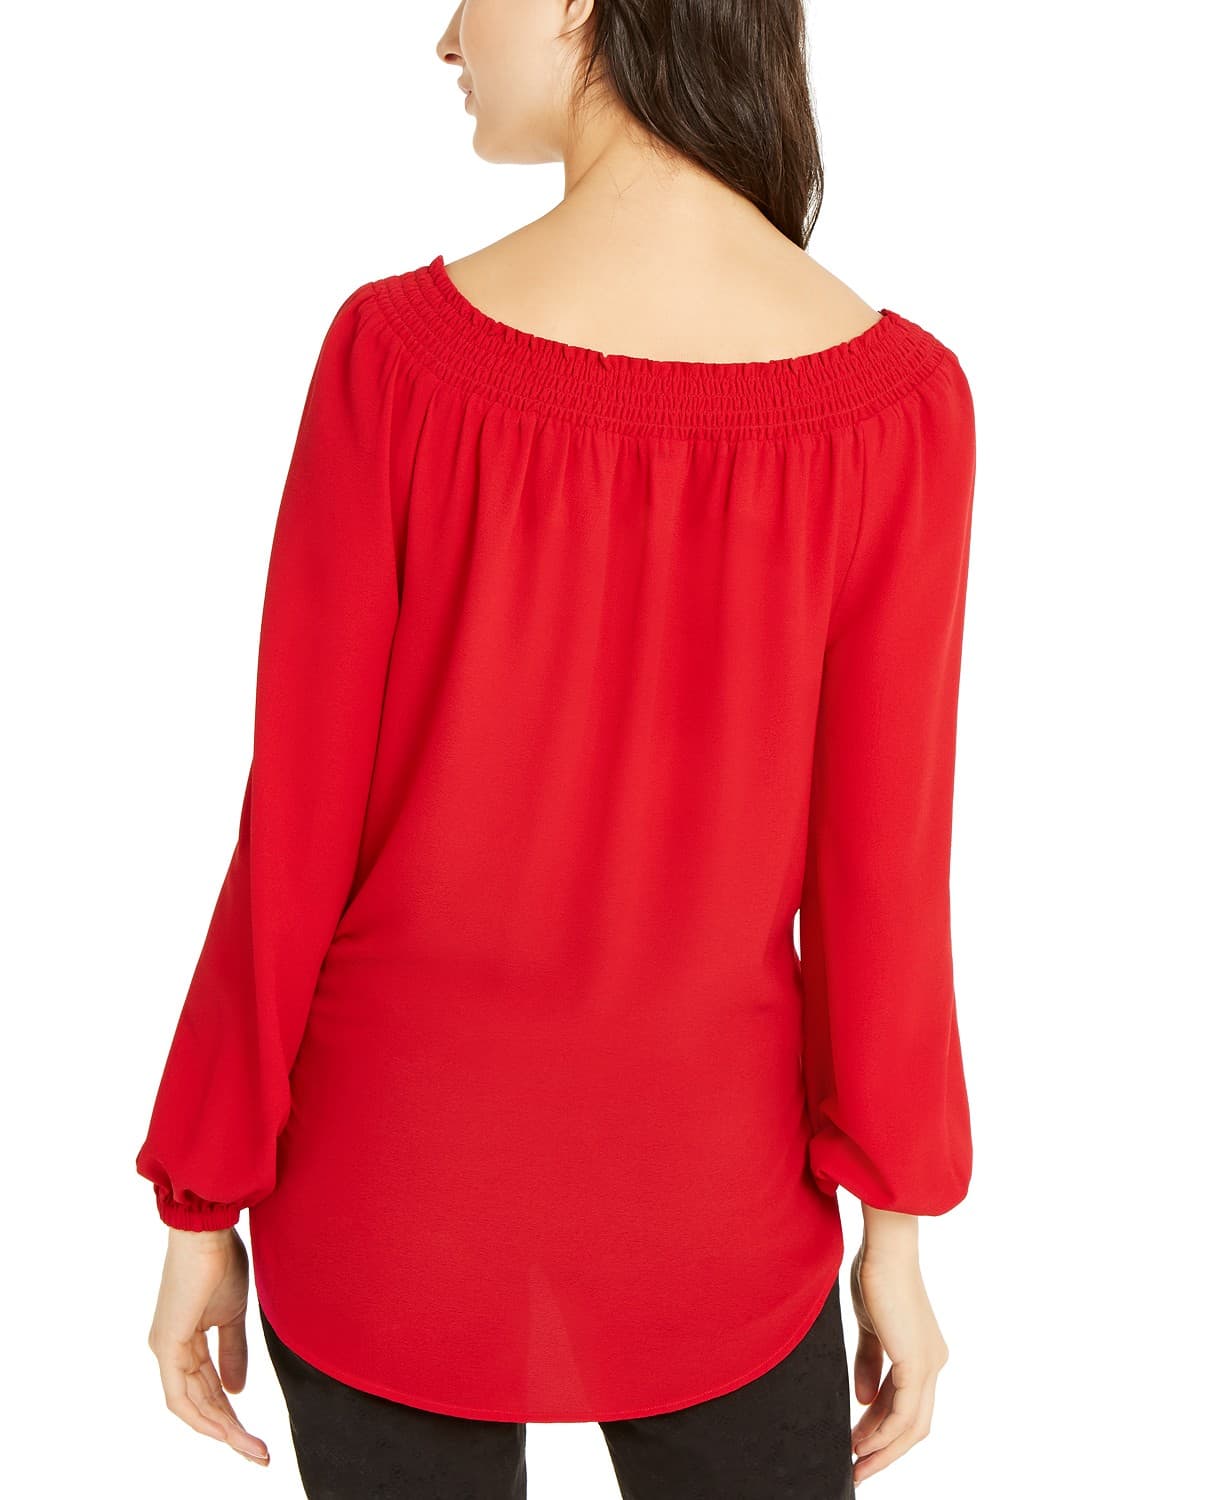 woocommerce-673321-2209615.cloudwaysapps.com-michael-michael-kors-womens-red-tie-front-smocked-off-the-shoulder-top